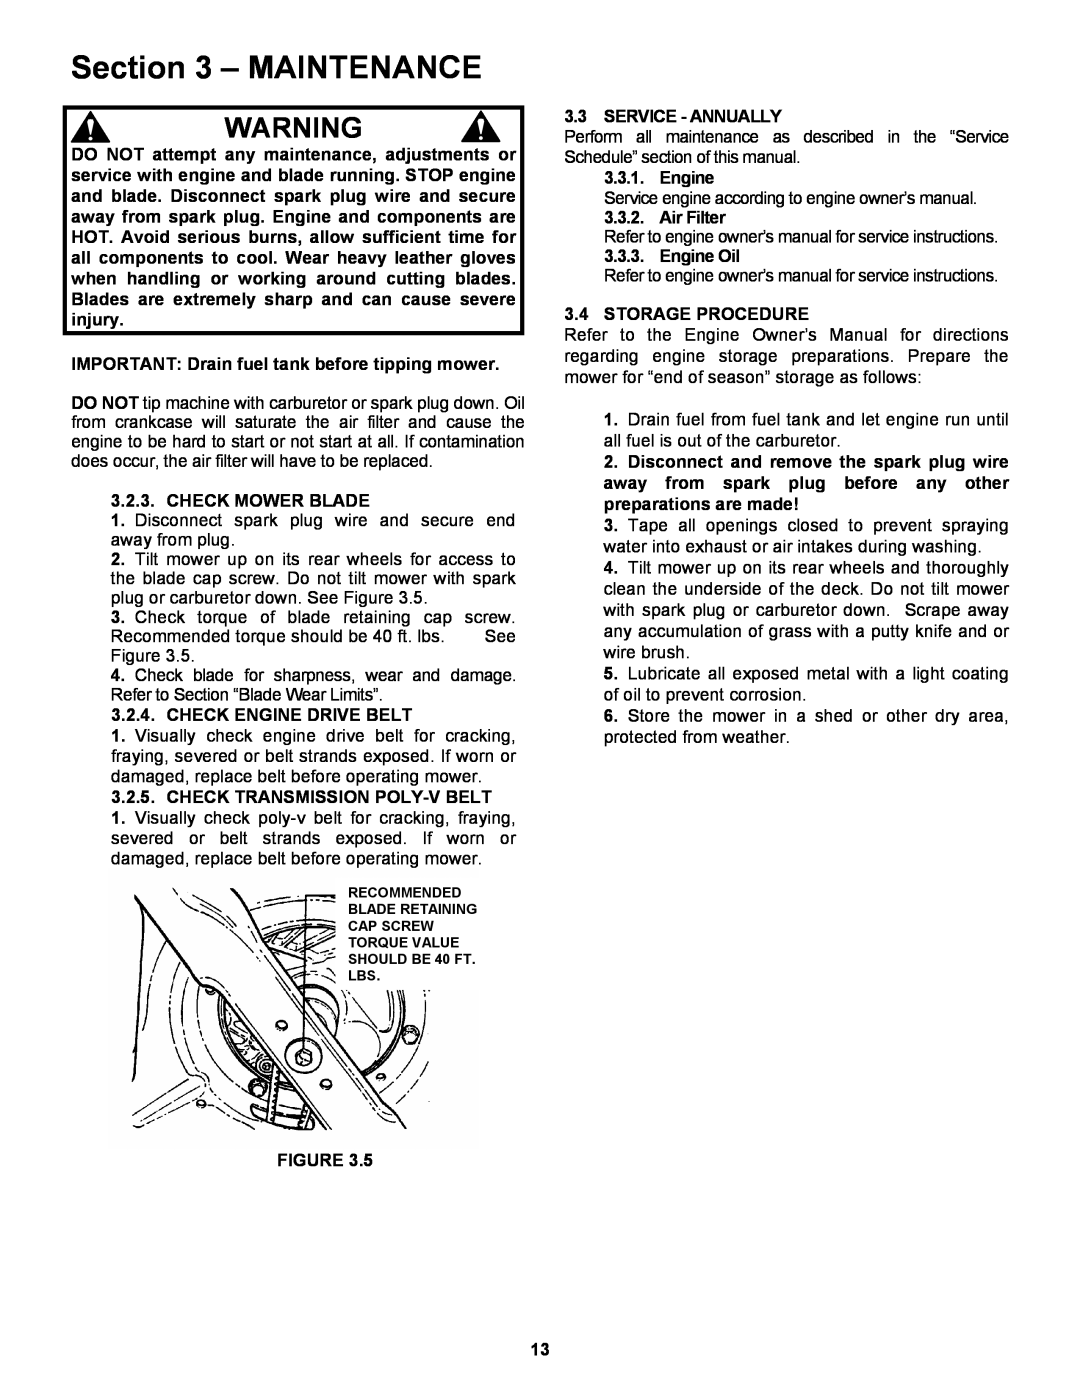 Snapper CRP216019KWV important safety instructions Maintenance, IMPORTANT Drain fuel tank before tipping mower 